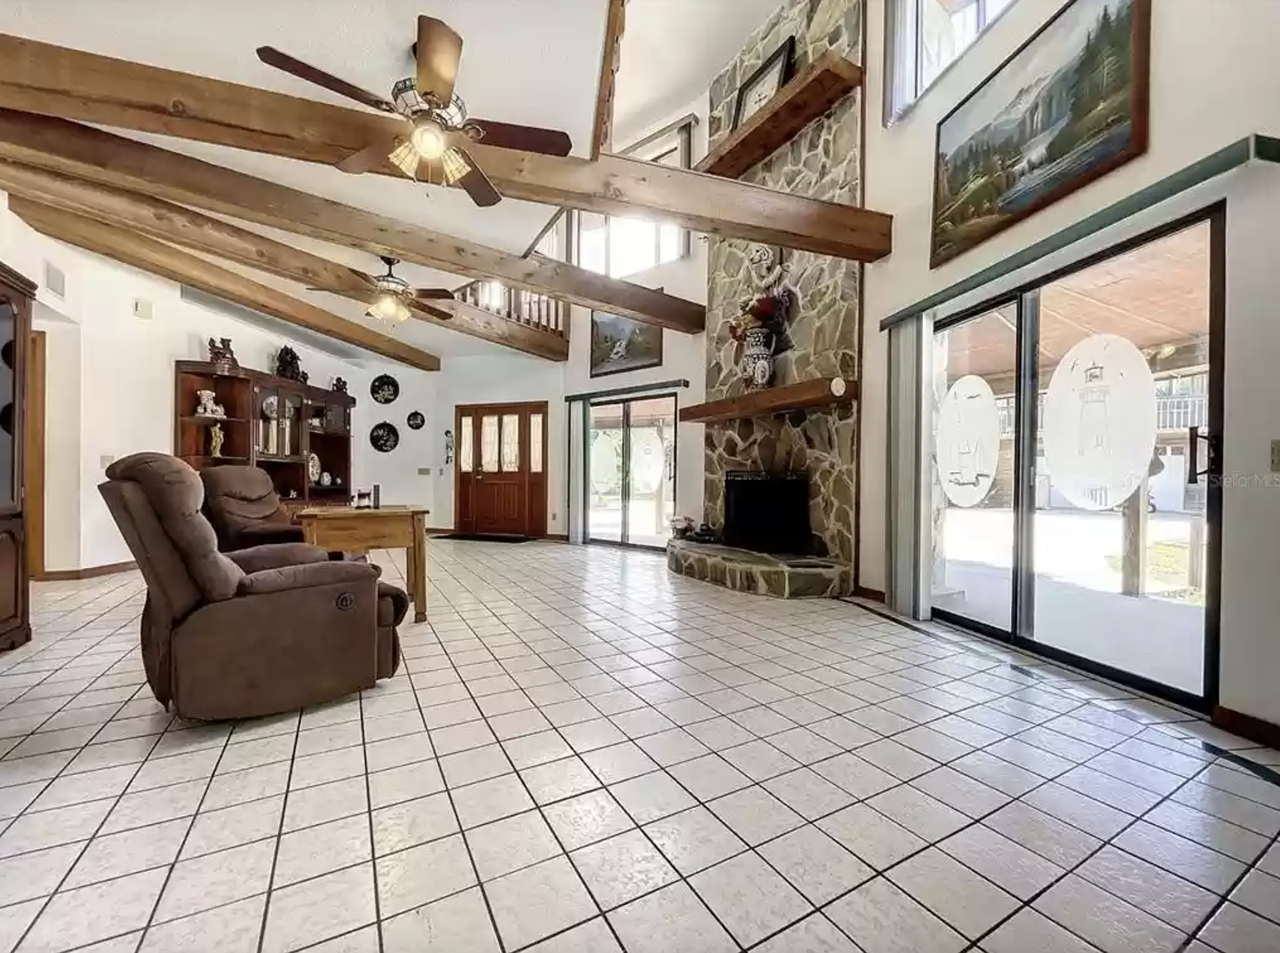 This Florida estate comes with two octadecagon homes on the same lot